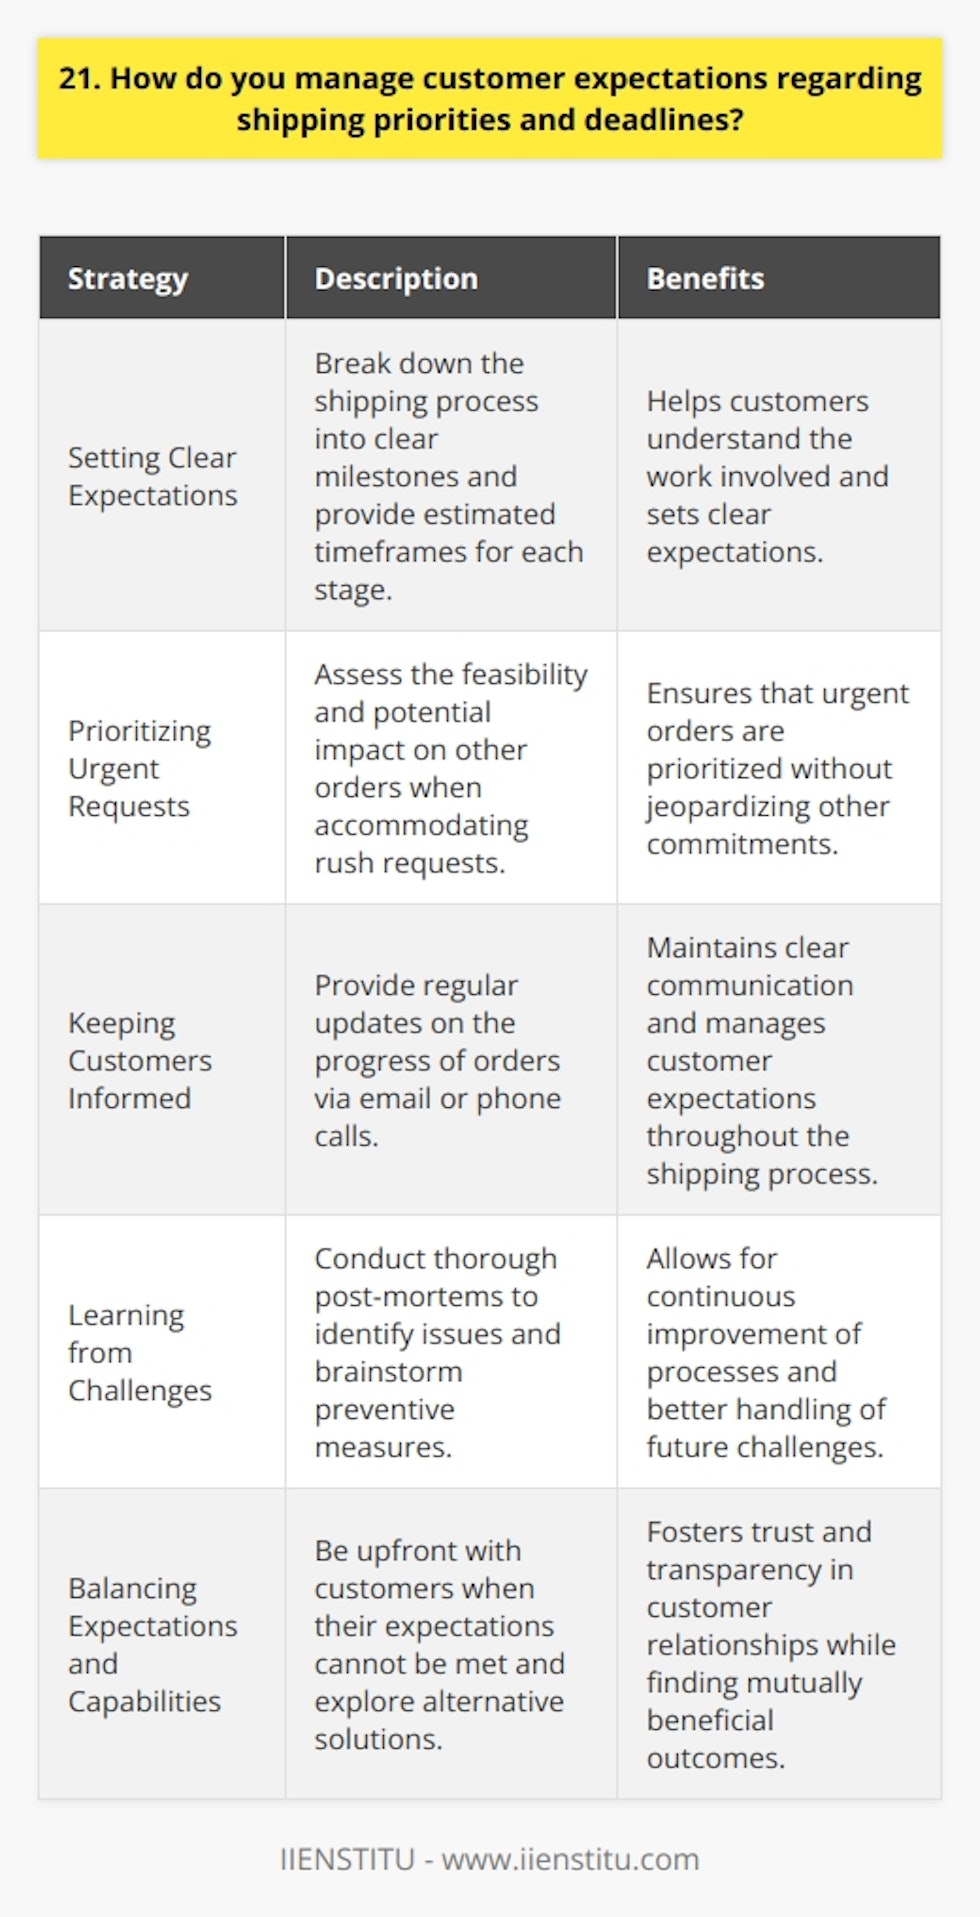 When it comes to managing customer expectations regarding shipping priorities and deadlines, I believe in being proactive and communicative. I always strive to set realistic expectations from the start, based on our current workload and capabilities. If a customer has a particularly tight deadline, Ill have an honest conversation with them about what we can realistically achieve. Setting Clear Expectations One strategy Ive found effective is to break down the shipping process into clear milestones. Ill explain to the customer what steps are involved and provide estimated timeframes for each stage. This helps them understand the work that goes on behind the scenes and sets clear expectations. Prioritizing Urgent Requests When a customer comes to me with an urgent shipping request, I first assess the feasibility and potential impact on other orders. If we can accommodate the rush without jeopardizing other commitments, Ill work with my team to prioritize that order. However, if its simply not possible, I believe in being upfront with the customer and exploring alternative solutions. Keeping Customers Informed Throughout the shipping process, I make it a point to keep customers updated on the progress of their orders. Whether its a quick email letting them know their package has been dispatched or a phone call to inform them of any unexpected delays, I believe that regular communication is key to managing expectations. Learning from Challenges Of course, sometimes things dont go according to plan. When faced with shipping delays or other challenges, I see it as an opportunity to learn and improve our processes. I always conduct a thorough post-mortem with my team to identify what went wrong and brainstorm ways to prevent similar issues in the future. At the end of the day, managing customer expectations around shipping is all about clear communication, setting realistic goals, and being proactive in addressing any challenges that arise. Its a delicate balance, but one Im continuously working to strike in order to deliver the best possible experience for our customers.